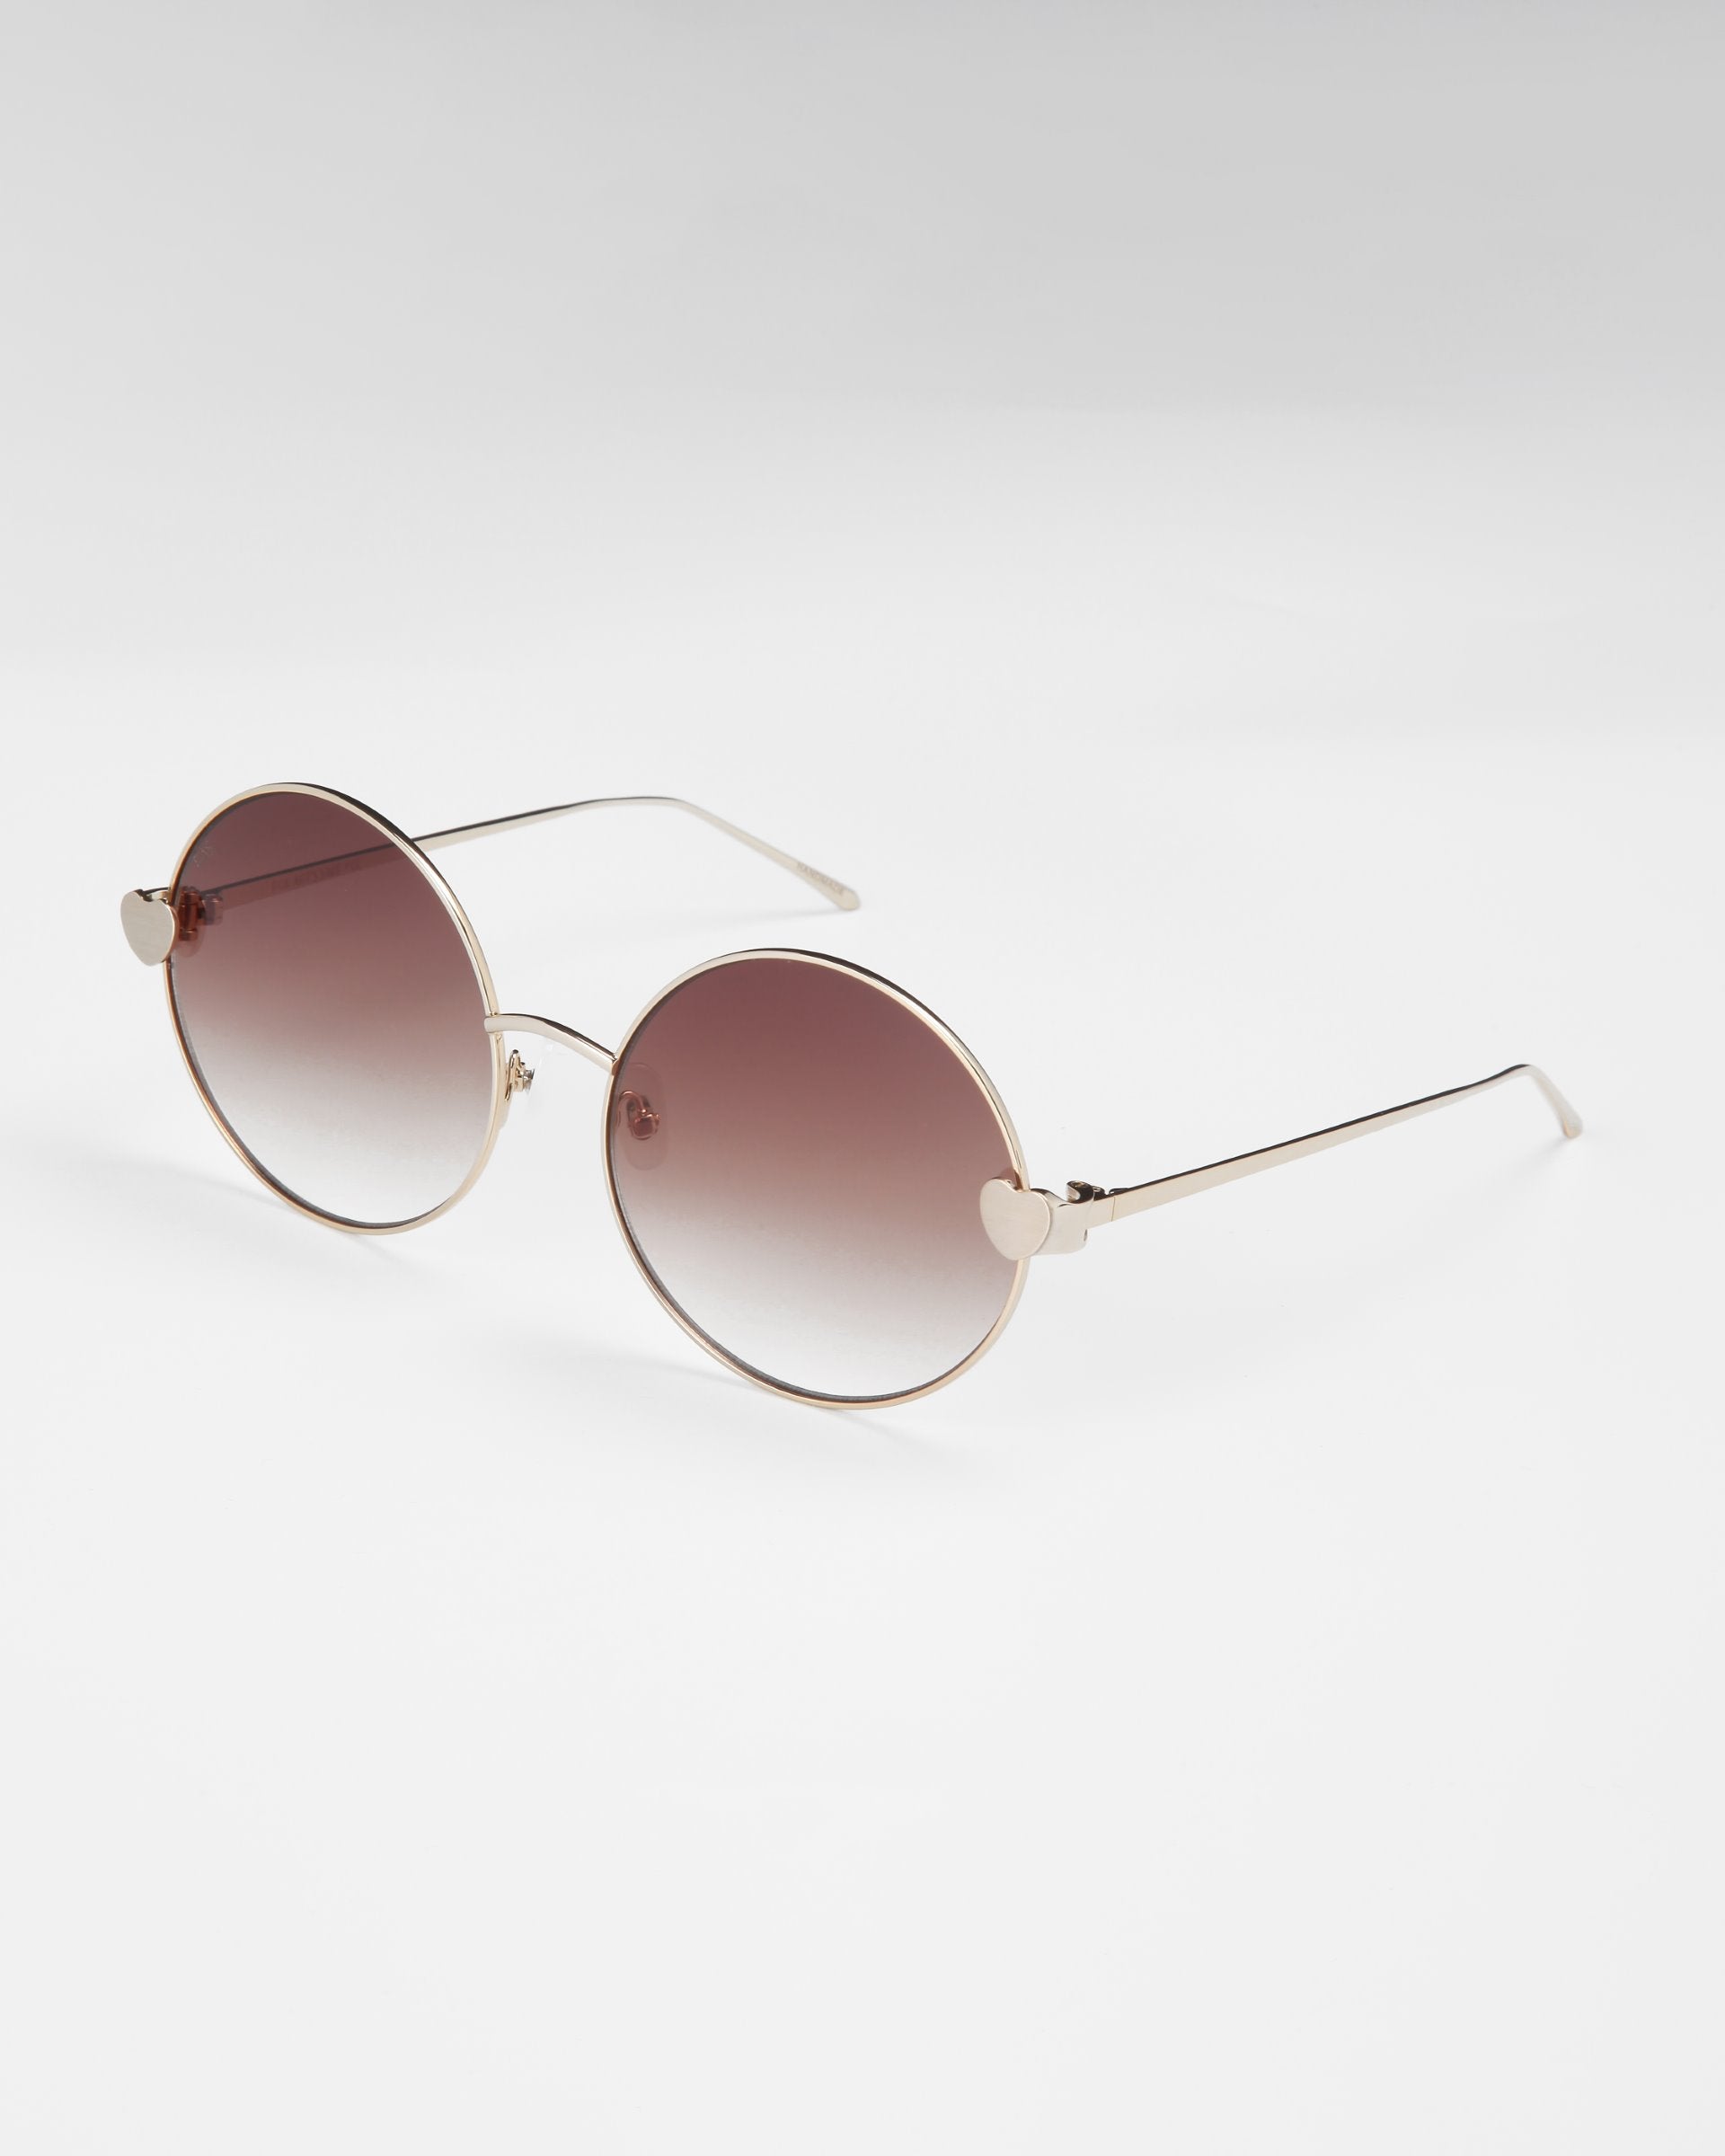 A pair of For Art&#39;s Sake® Love Story shades with round, gold-framed sunglasses featuring gradient brown lenses. The thin metal arms boast small heart-shaped accents near the hinges, and the jadestone nose pads ensure comfort. With 100% UV protection, these sunglasses rest elegantly on a light, neutral background.